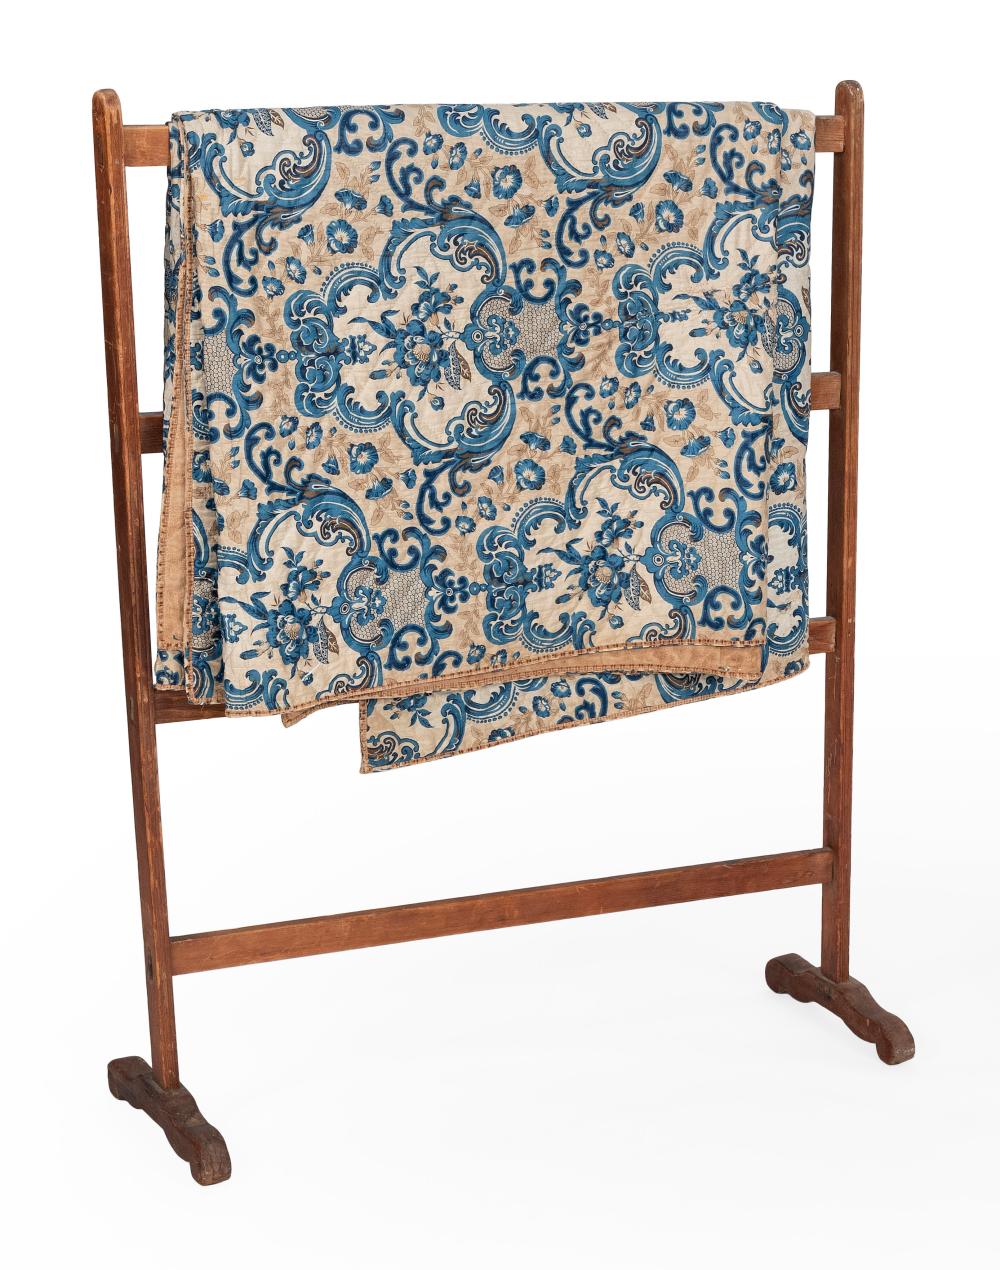 QUILT RACK WITH A QUILT LATE 19TH